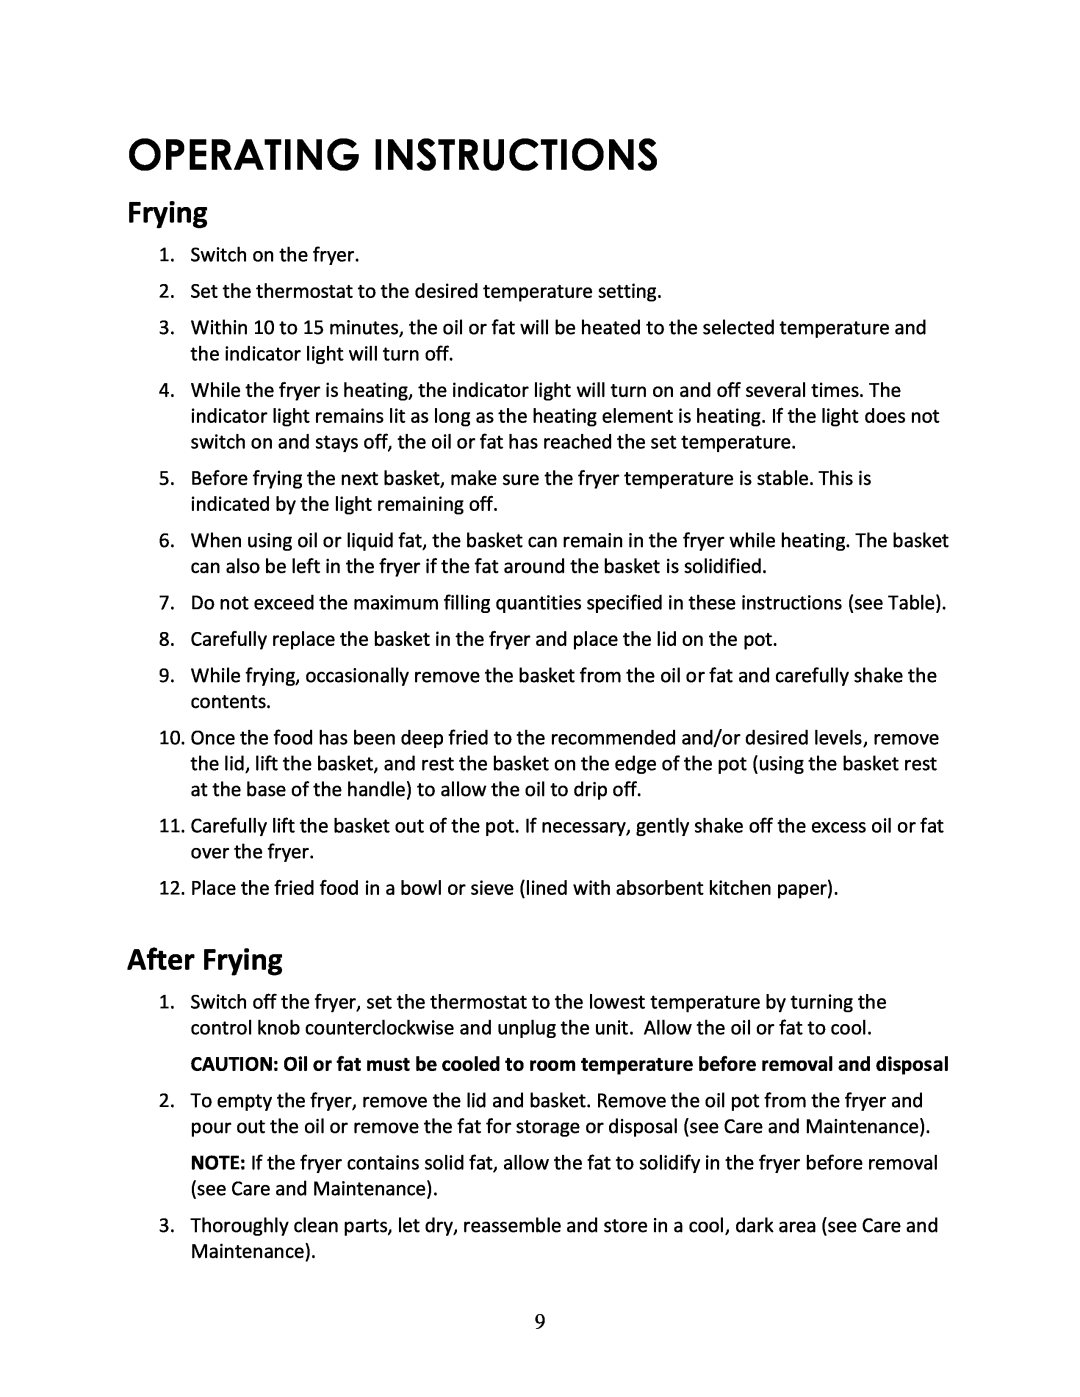 Magic Chef MCSDF15ST instruction manual Operating Instructions, After Frying 